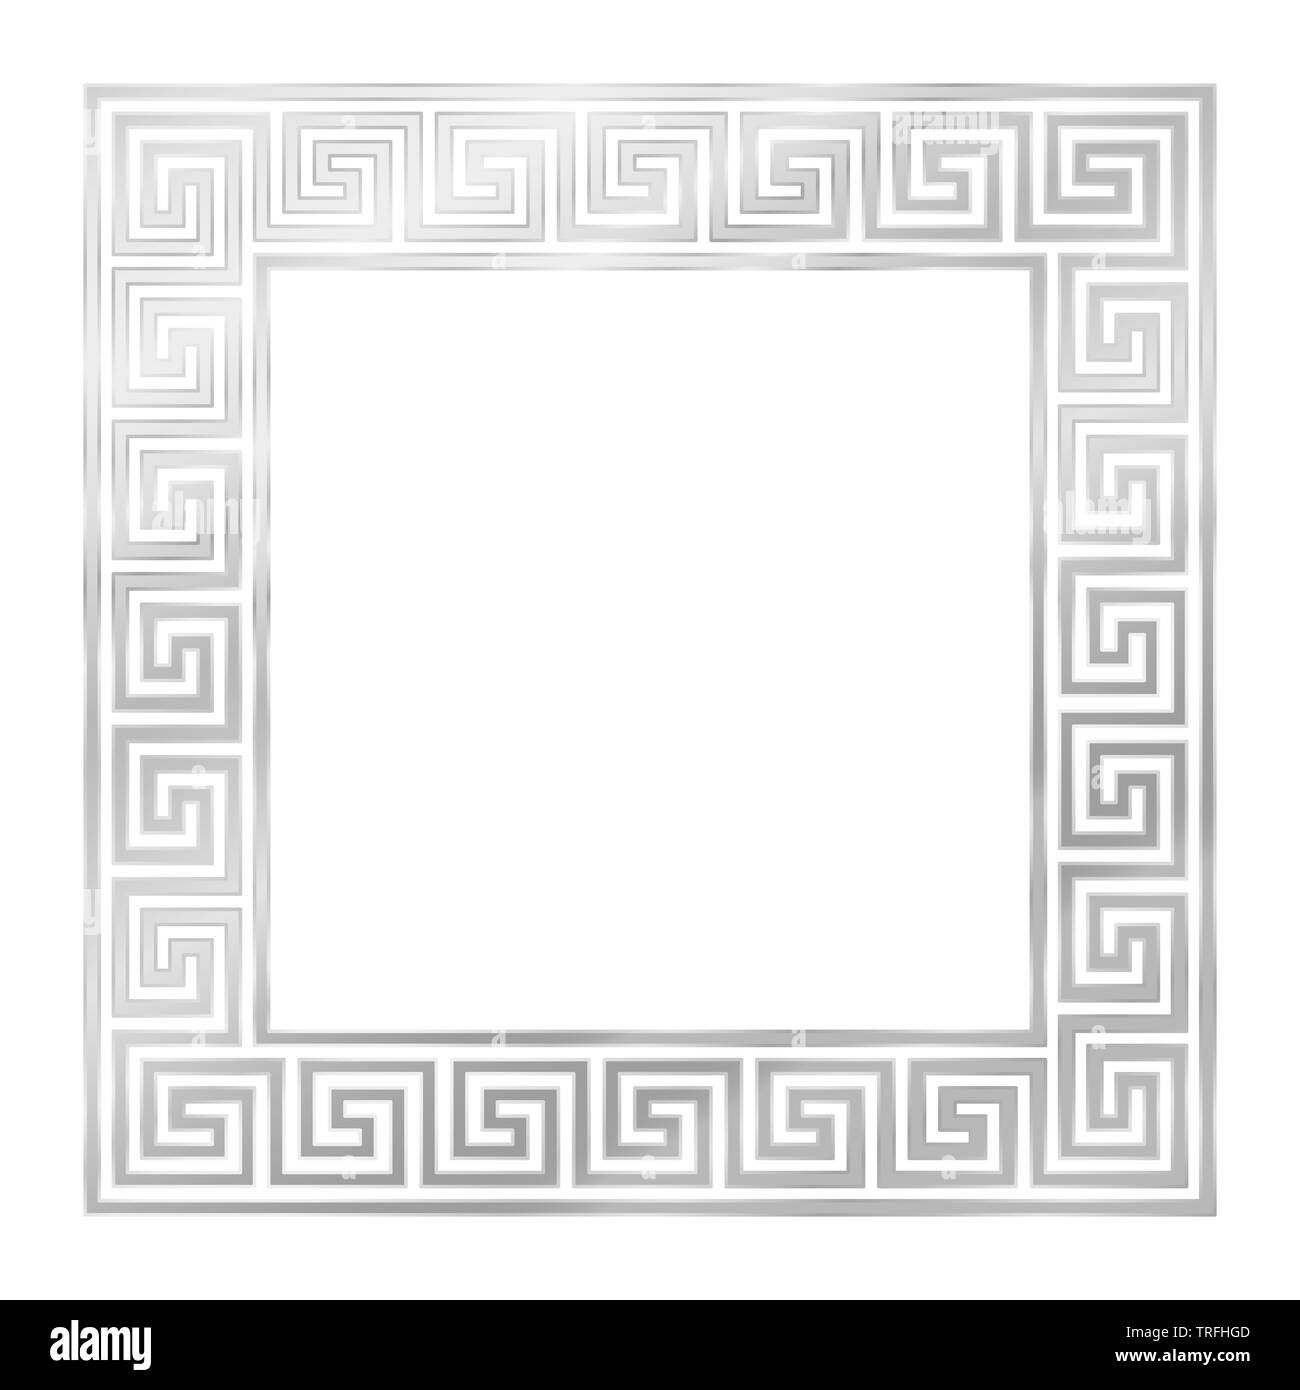 Silver square frame, seamless meander pattern. Meandros, a decorative border, constructed from continuous lines, shaped into a repeated motif. Stock Photo